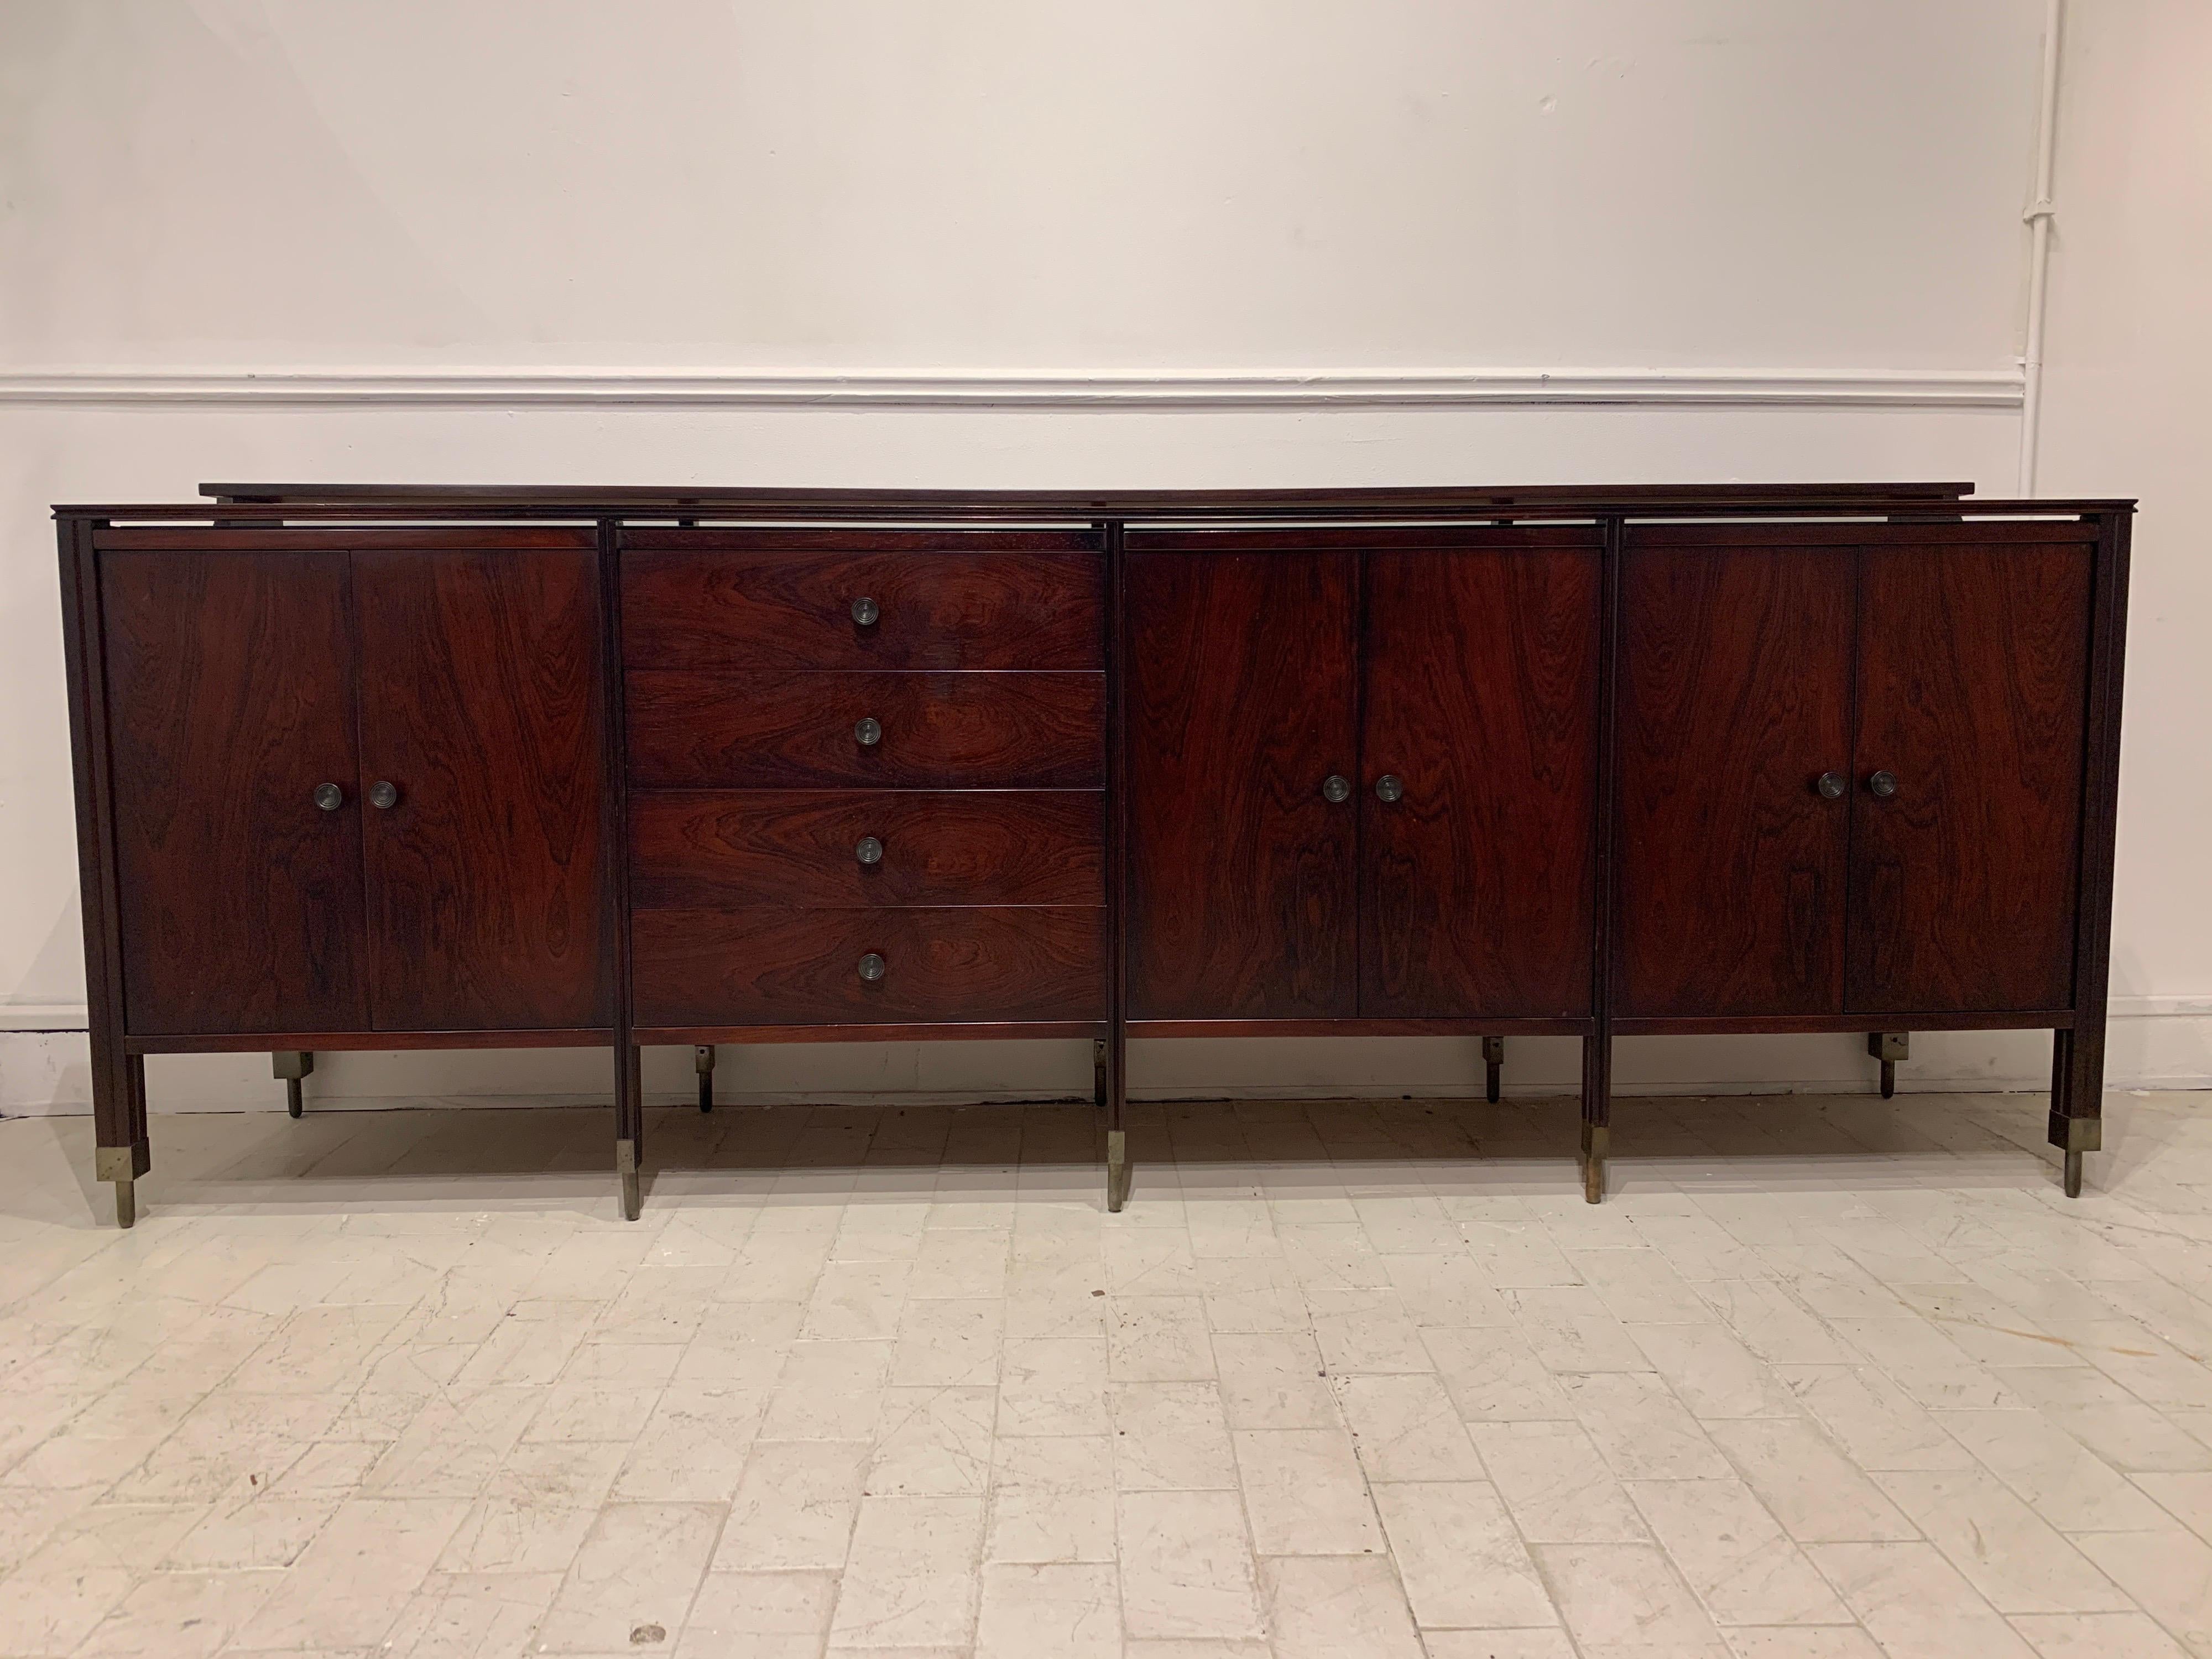 This sideboard is designed by Carlo de Carli and executed by Sormani in 1964 from D154 series. The doors and drawers are veneered. Feet and handles are in brass. On the top rests a black glass top.

 